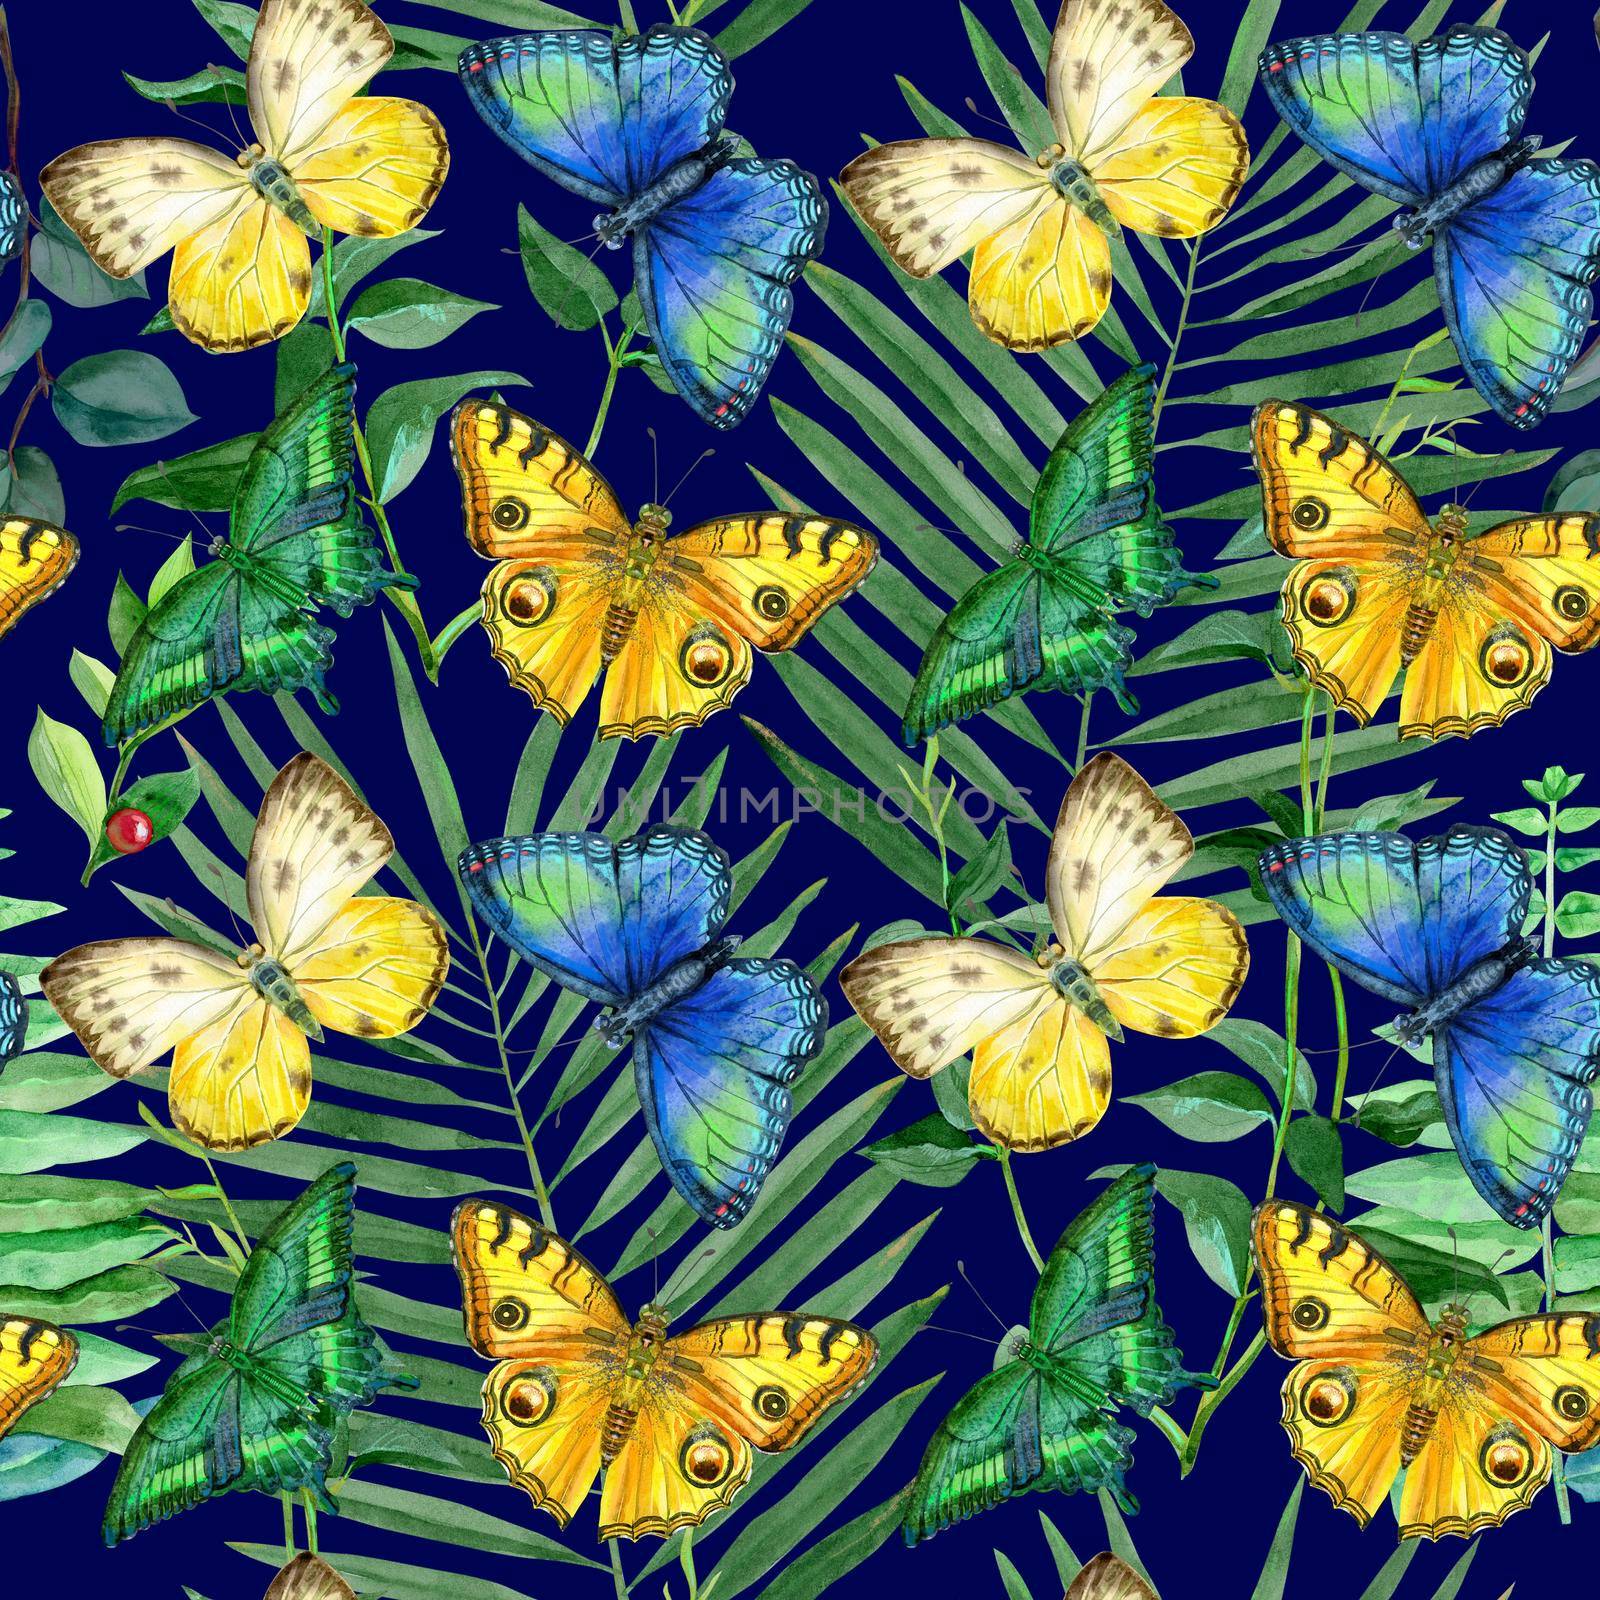 Floral leaves seamless pattern with colorful butterflies on dark blue background. Artistic design for floral print for packaging, textile, wallpaper, gift wrap, greeting or wedding background.